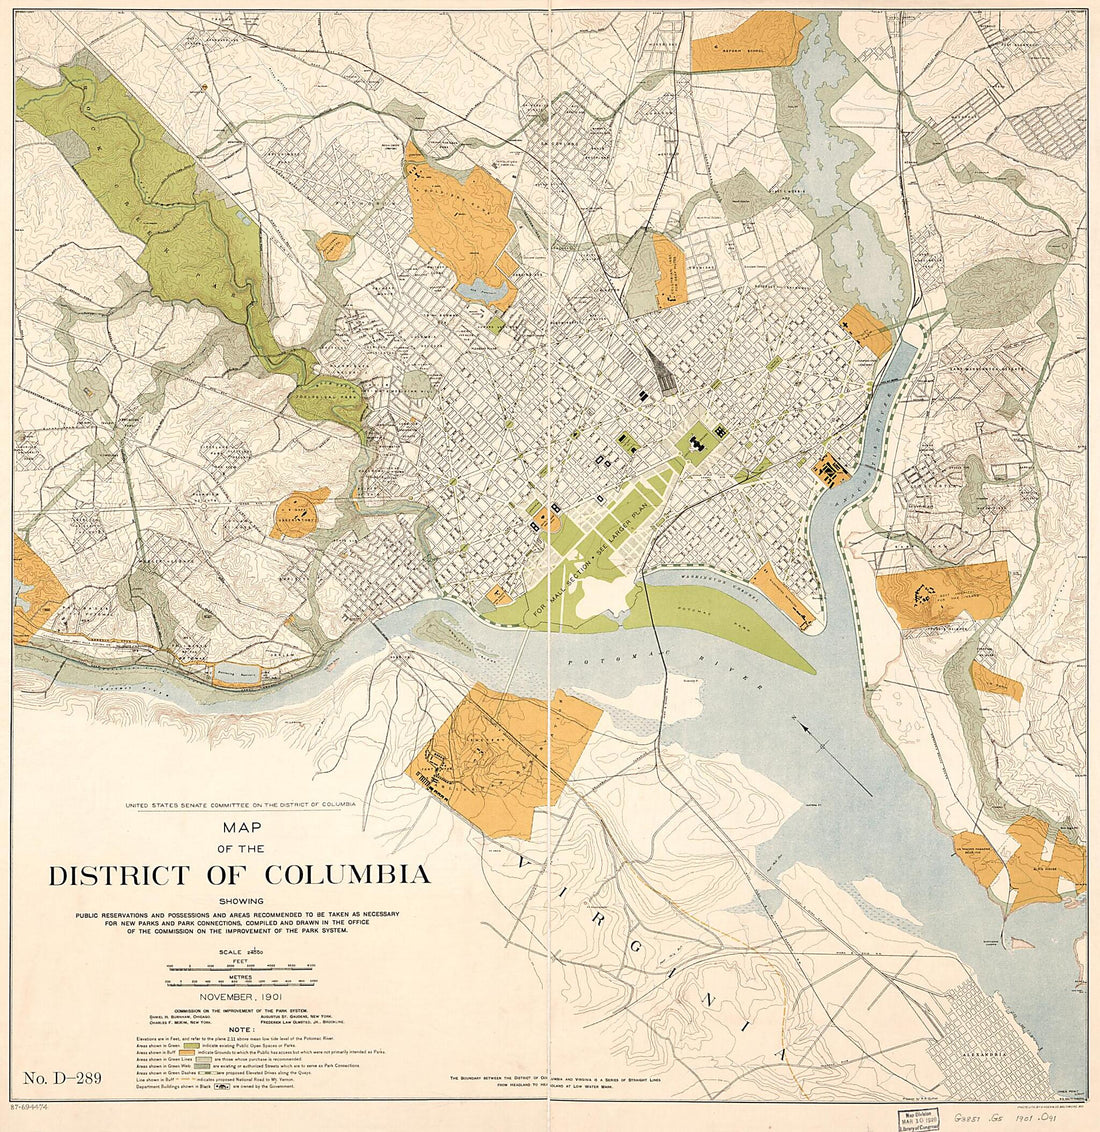 This old map of Map of the District of Columbia Showing Public Reservations and Possessions and Areas Recommended to Be Taken As Necessary for New Parks and Park Connections from 1901 was created by  District of Columbia. Commission on the Improvement of